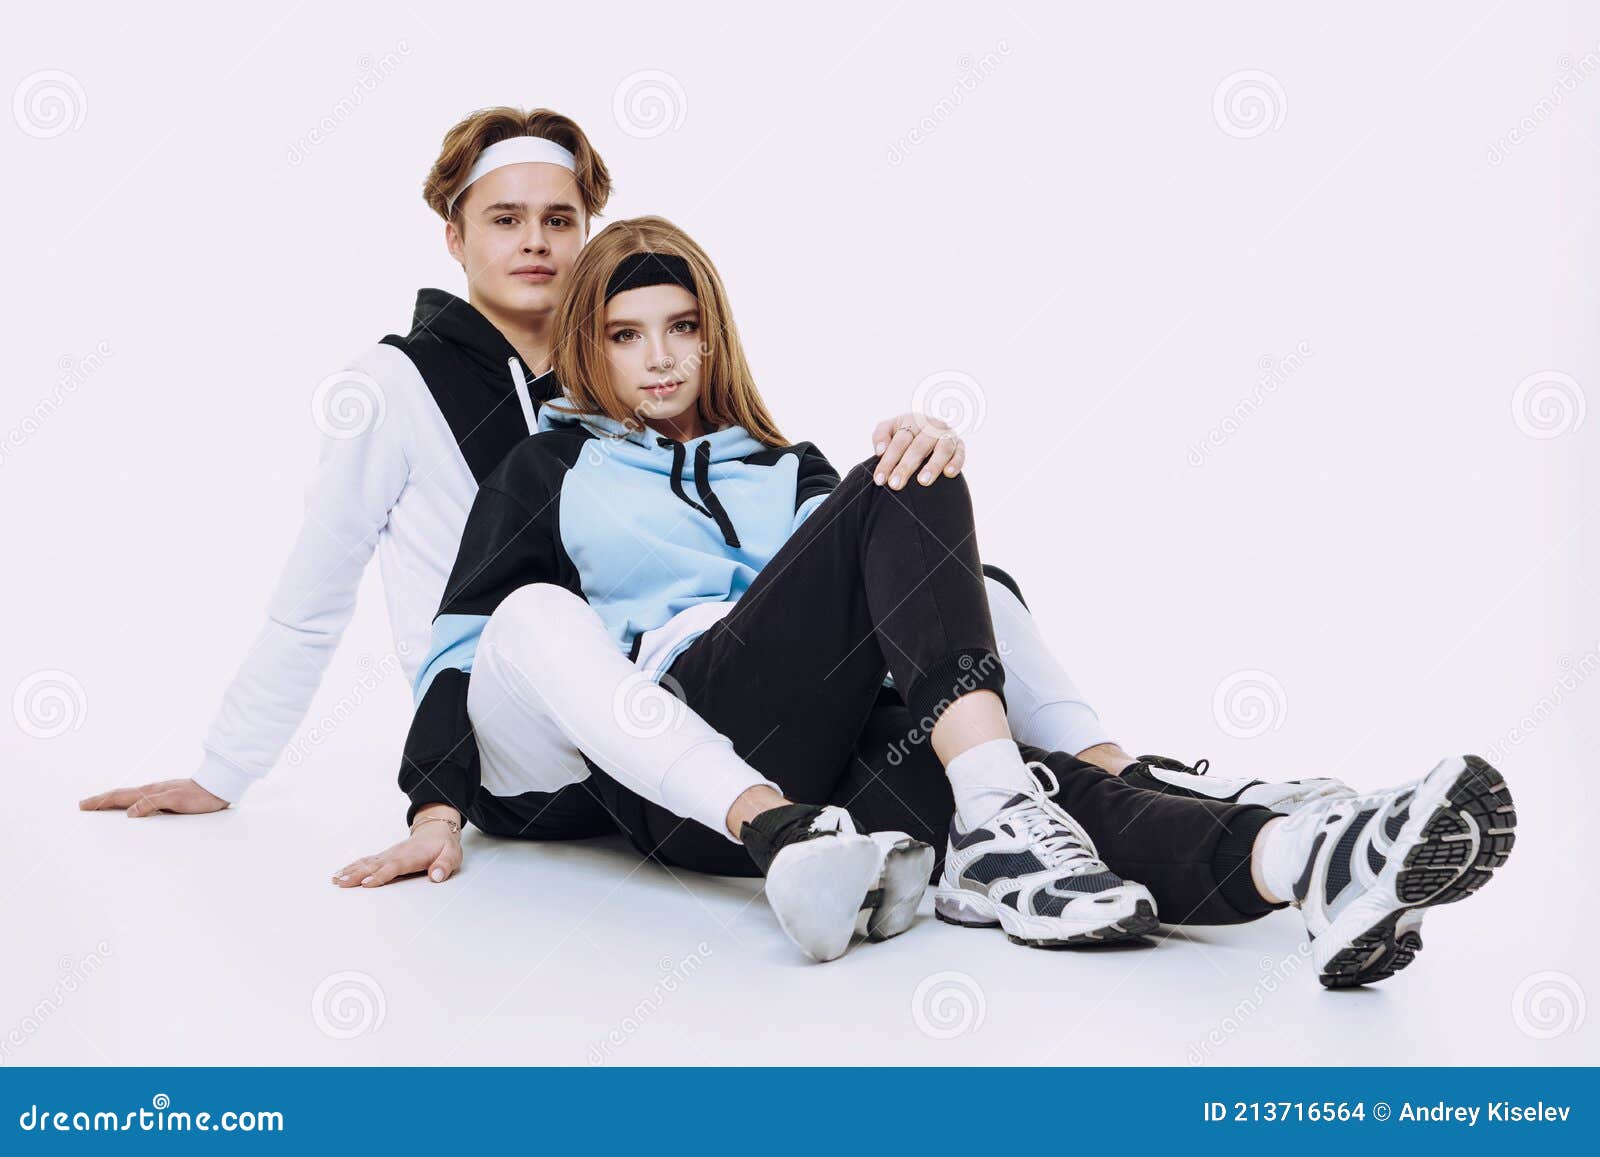 Couple Posing In Street Wear, Blue Backdrop, Free Stock Photo and Image  667827332